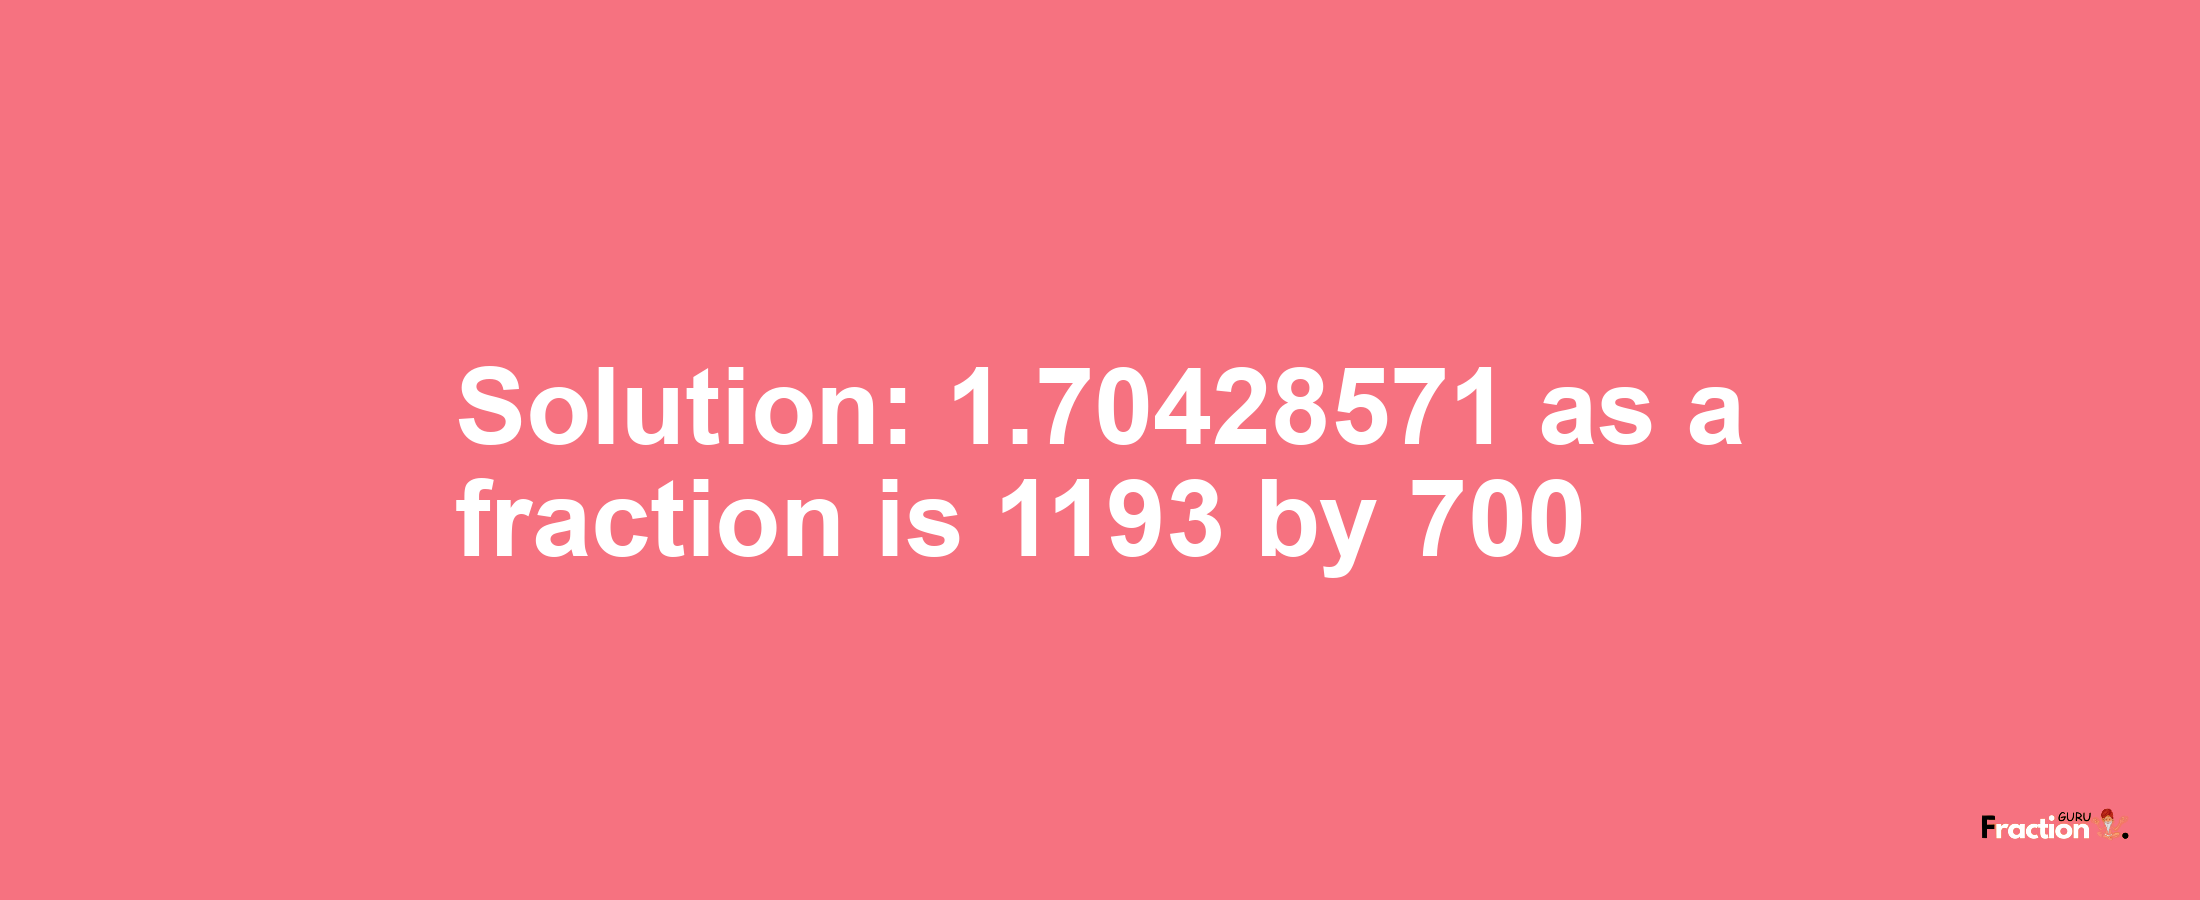 Solution:1.70428571 as a fraction is 1193/700